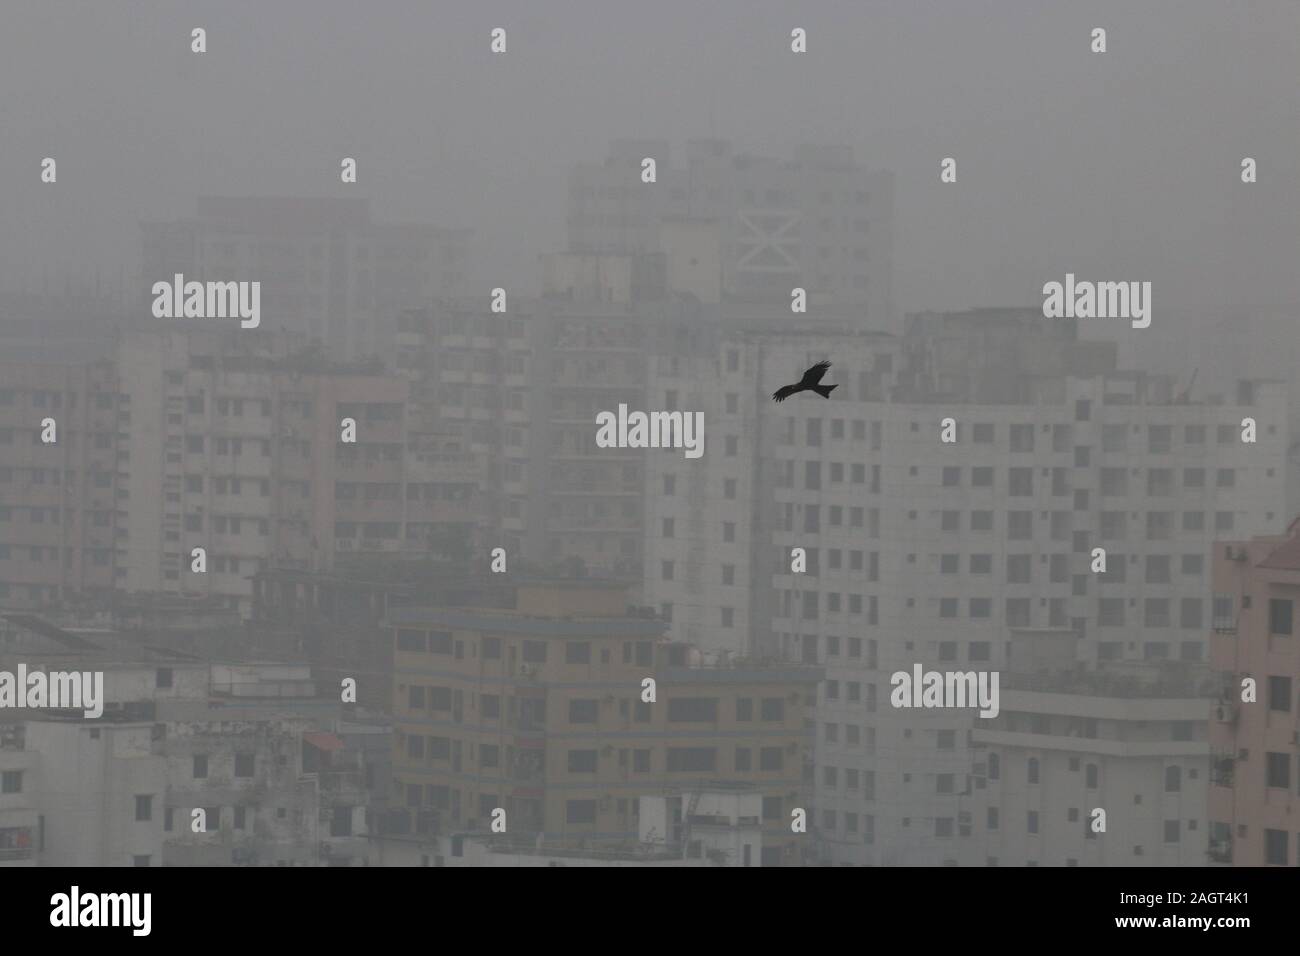 Dhaka, Bangladesh. 22nd Dec, 2019. A bird flies in a foggy weather during a cold wave in Dhaka.A biting cold spell continues to sweep across northern Bangladesh and a few other parts of the country although mercury readings point to an end to a cold wave. Credit: Sultan Mahmud Mukut/SOPA Images/ZUMA Wire/Alamy Live News Stock Photo